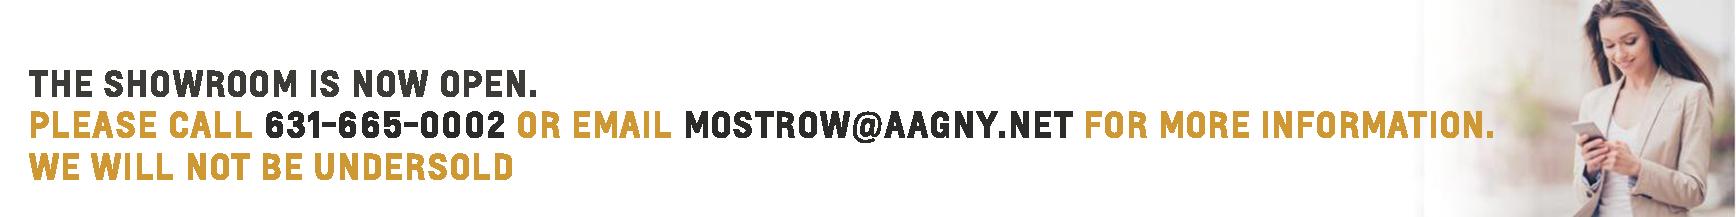 Due to the outbreak of Covid-19, our showroom is closed to the public. Sales is operational by appointment only; email mostrow@aagny.net for more information. Service is open by appointment! Call us at 631-665-0002